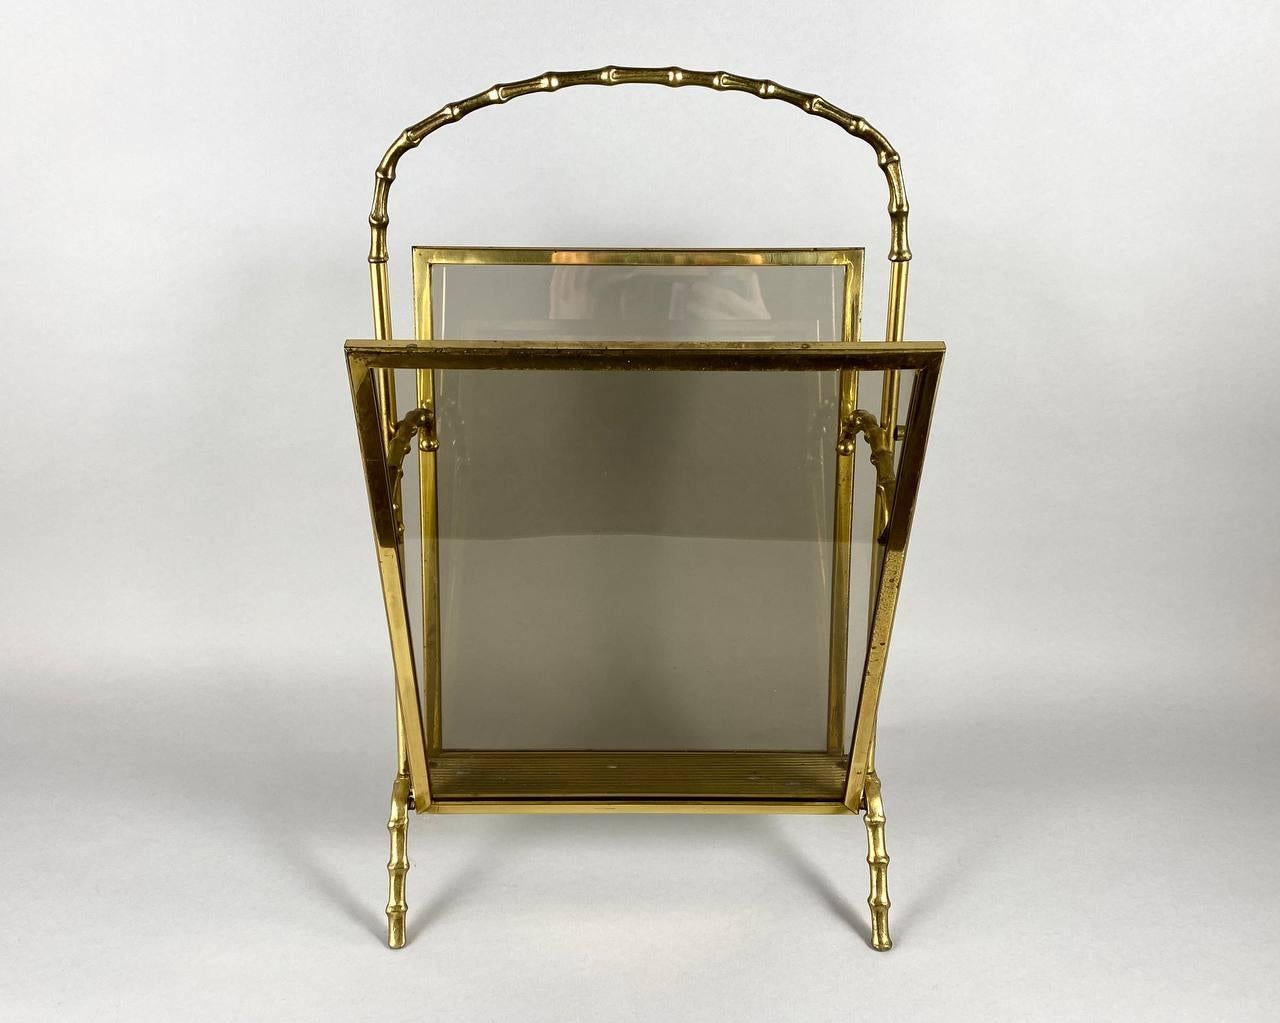 This vintage magazine rack made by famous French designer Maison Baguès in a faux bamboo bronze structure and smoked glass panels. Made in France, circa 1960s.

The magazine rack takes up little space, and its size allows you to place all popular